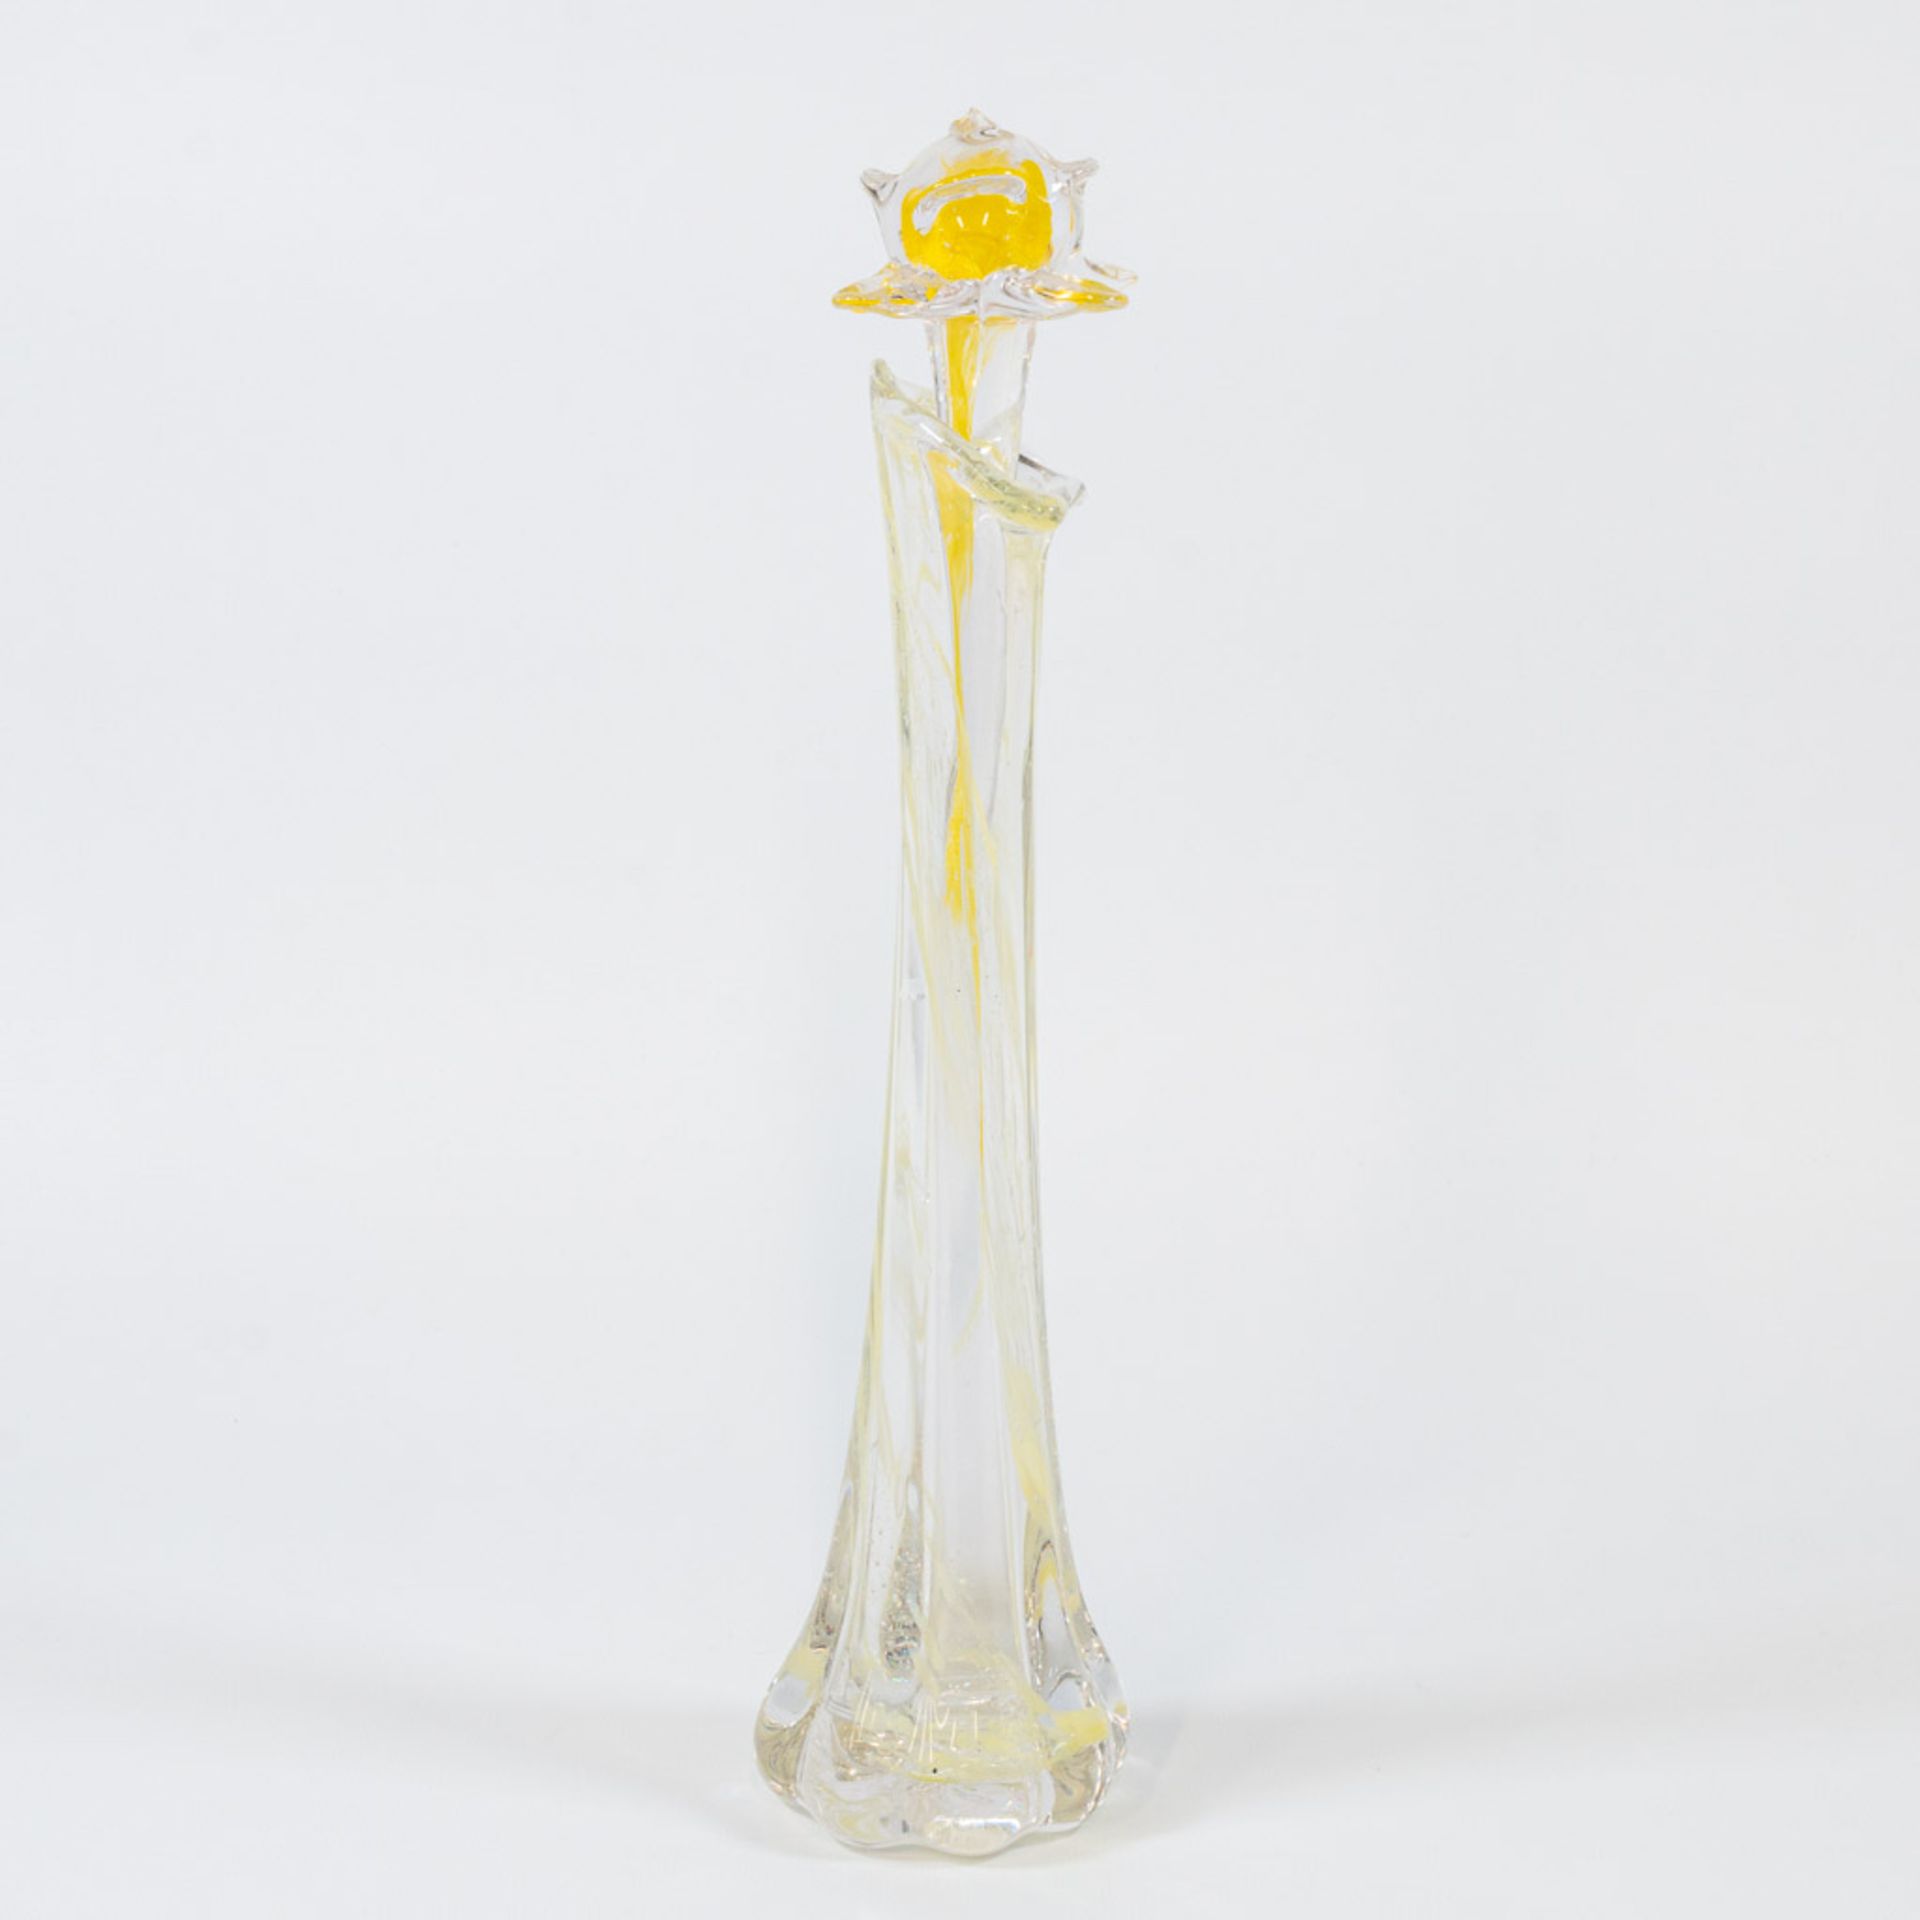 A collection of 4 vases and 4 glass flowers made in Murano, Italy. - Image 27 of 49